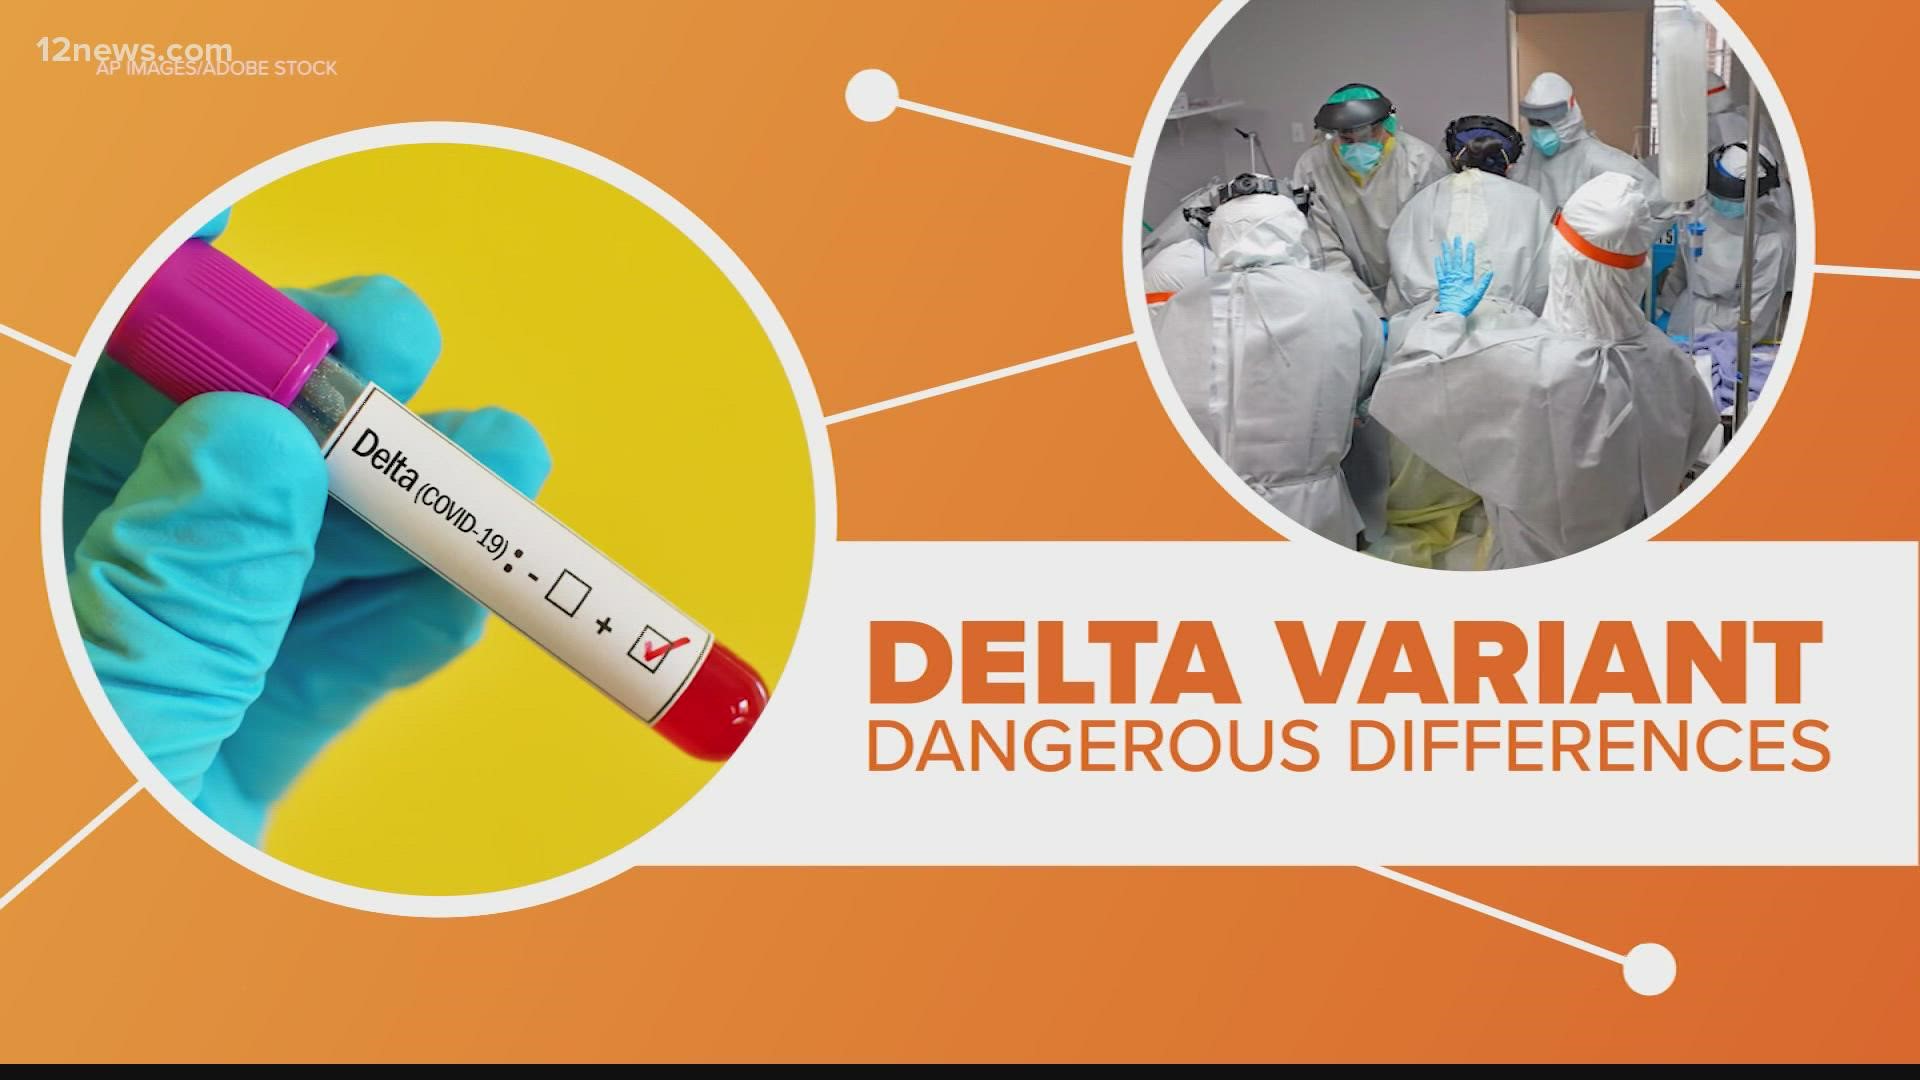 Why is the COVID-19 delta variant so contagious? We take a closer look to find out why.